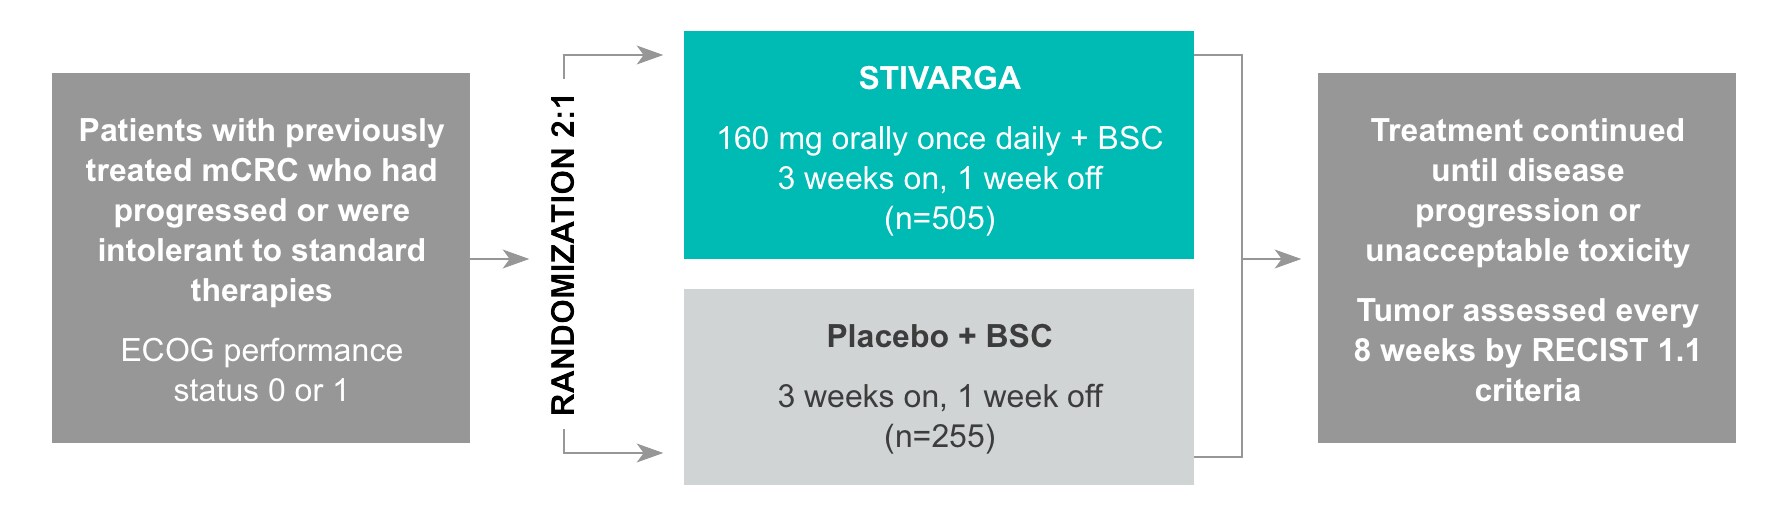 CORRECT trial design diagram. Patients intolerant to standard therapies were randomly (2:1 ratio) treated with Stivarga (regorafenib) or placebo + BSC. Treatment continued until disease progression of unacceptable toxicity. Tumor assessed every 8 weeks by RECIST 1.1 criteria.